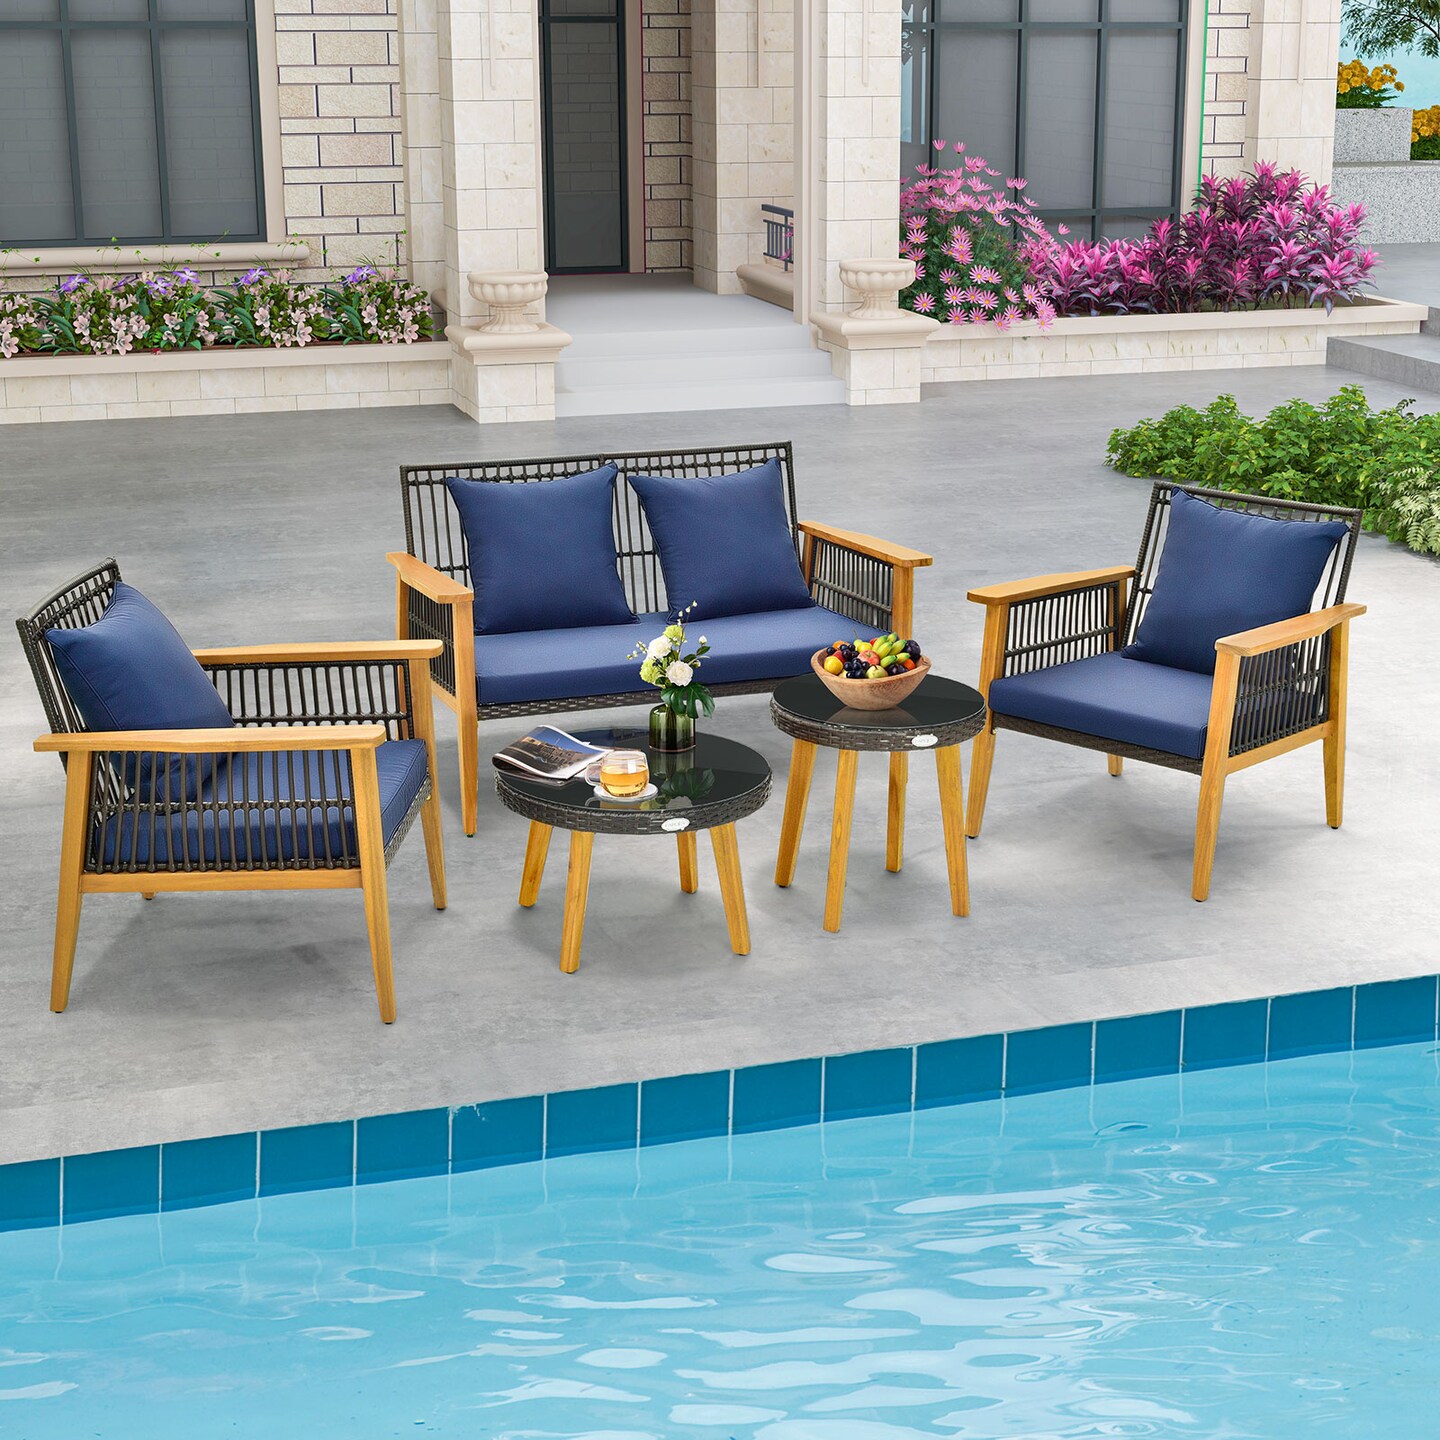 5 Piece Outdoor Conversation Set With 2 Coffee Tables For Backyard Poolside-Navy